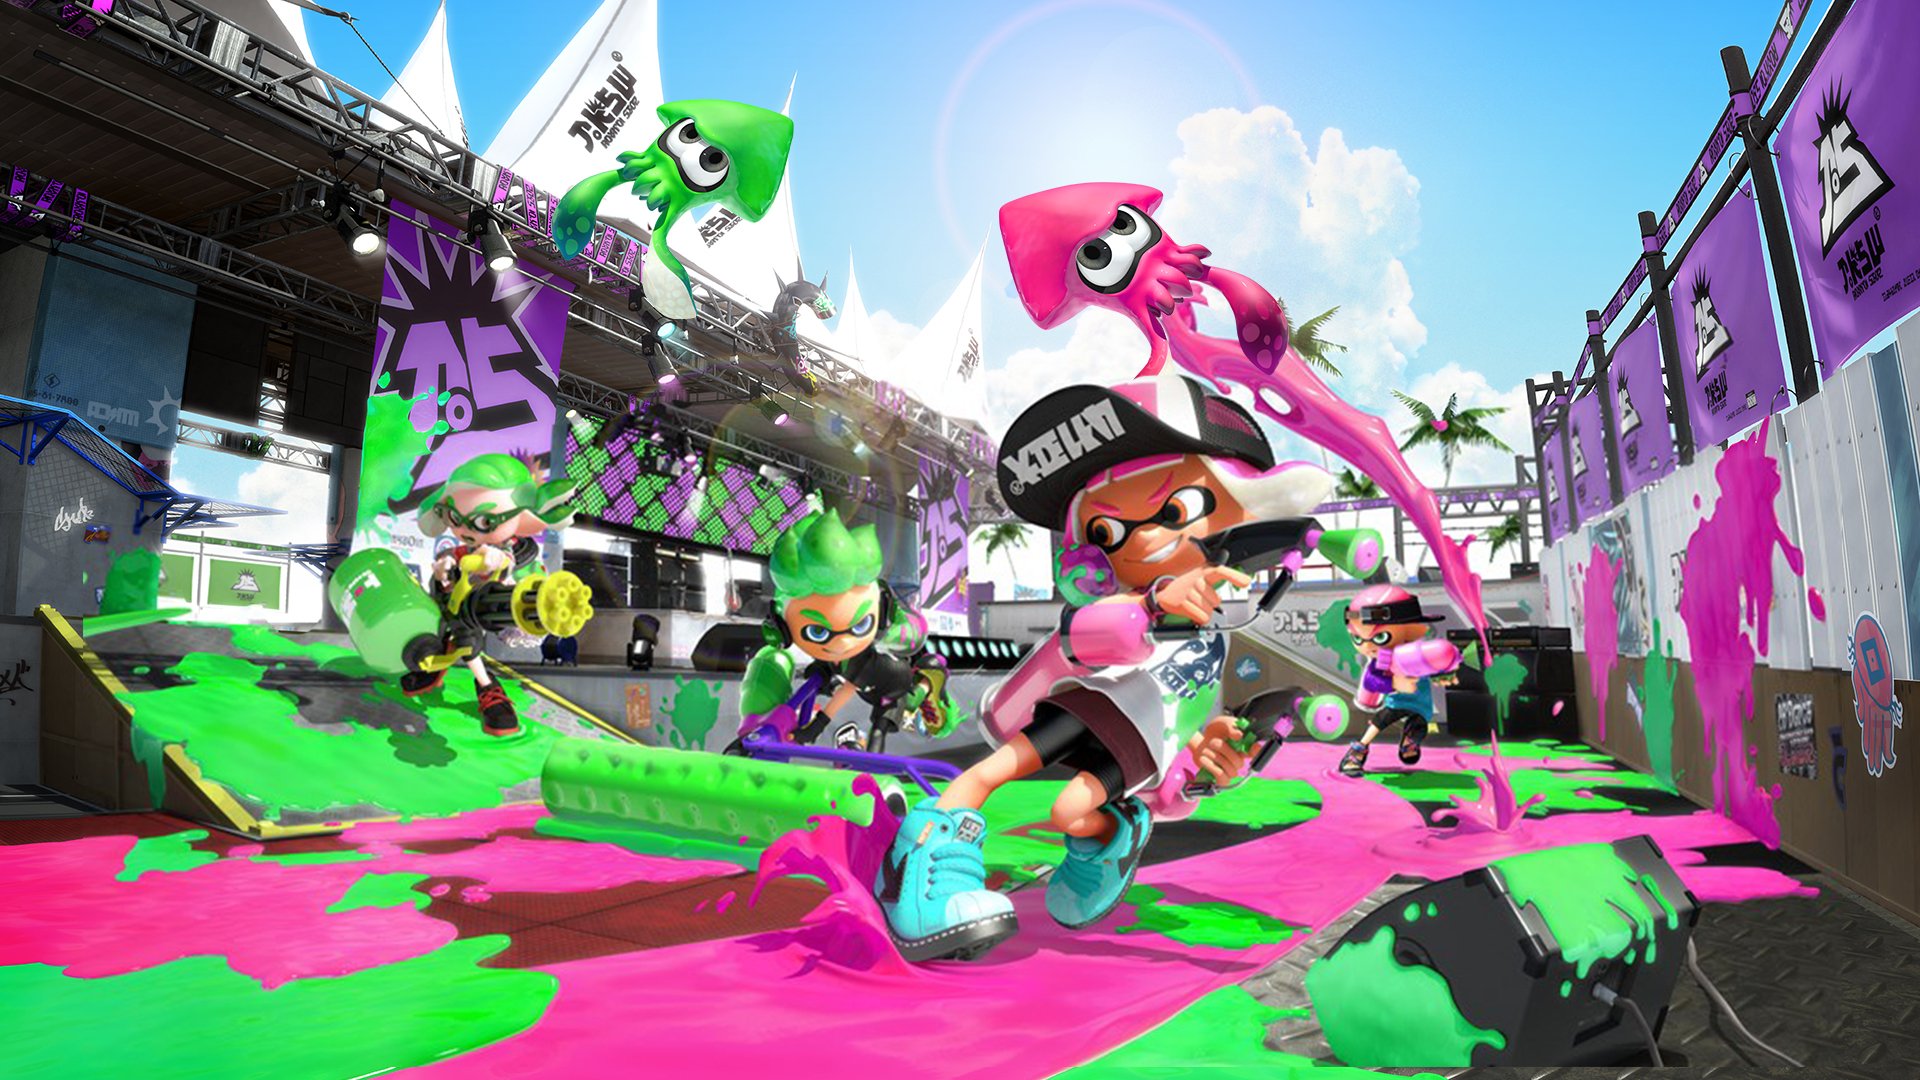 Splatoon 2 has helped bring a younger crowd to the Switch